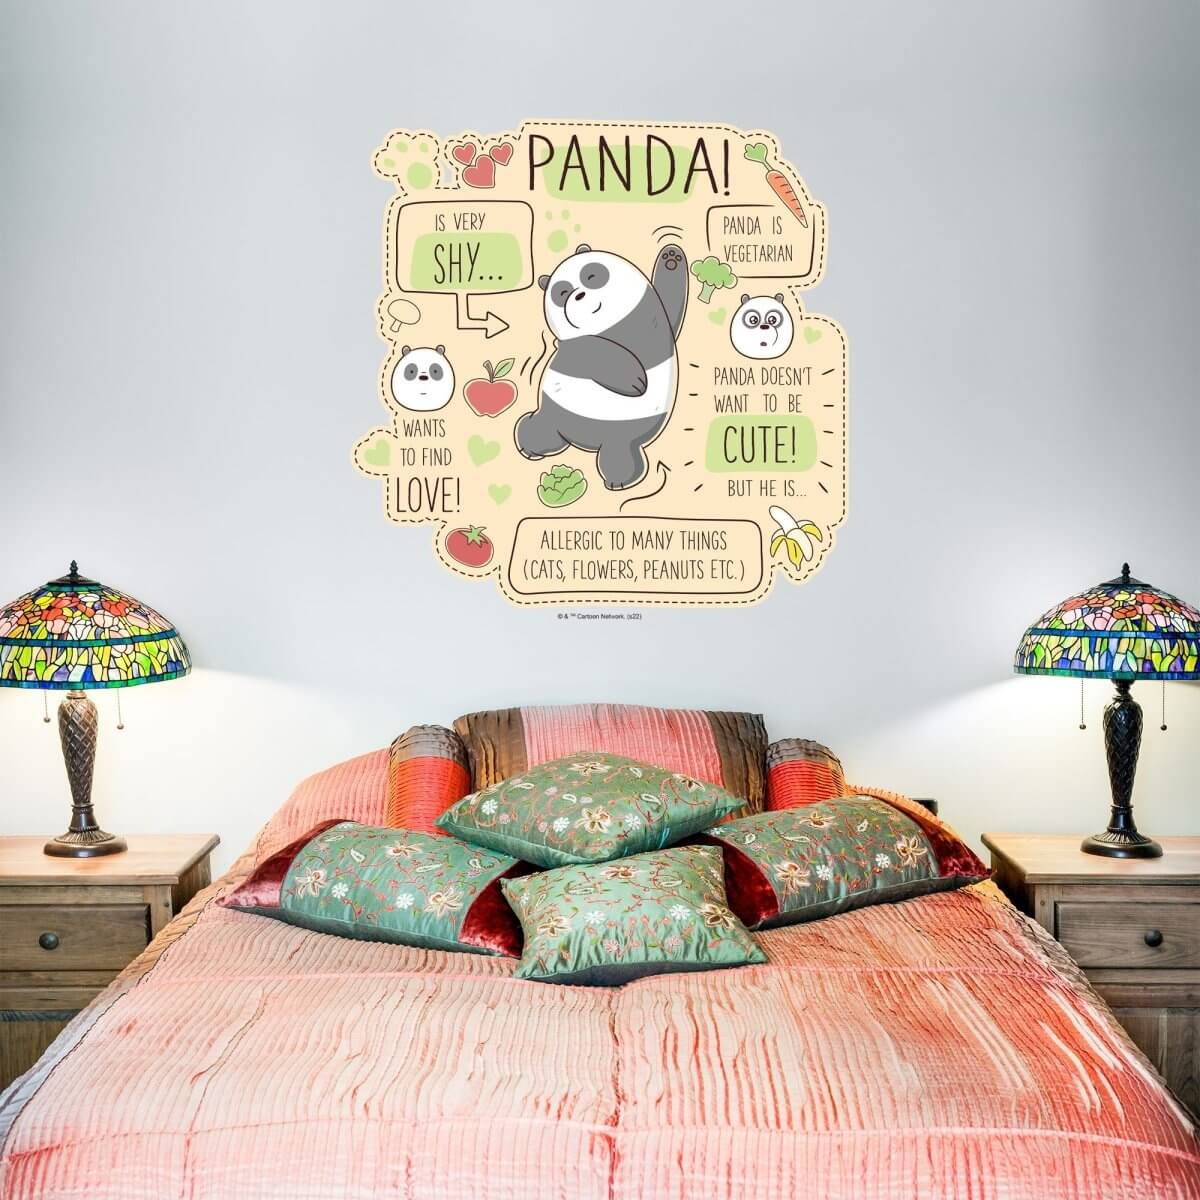 Kismet Decals Home & Room Decor We Bare Bears Get to Know Panda Wall decal sticker - officially licensed - latex printed with no solvent odor - Kismet Decals